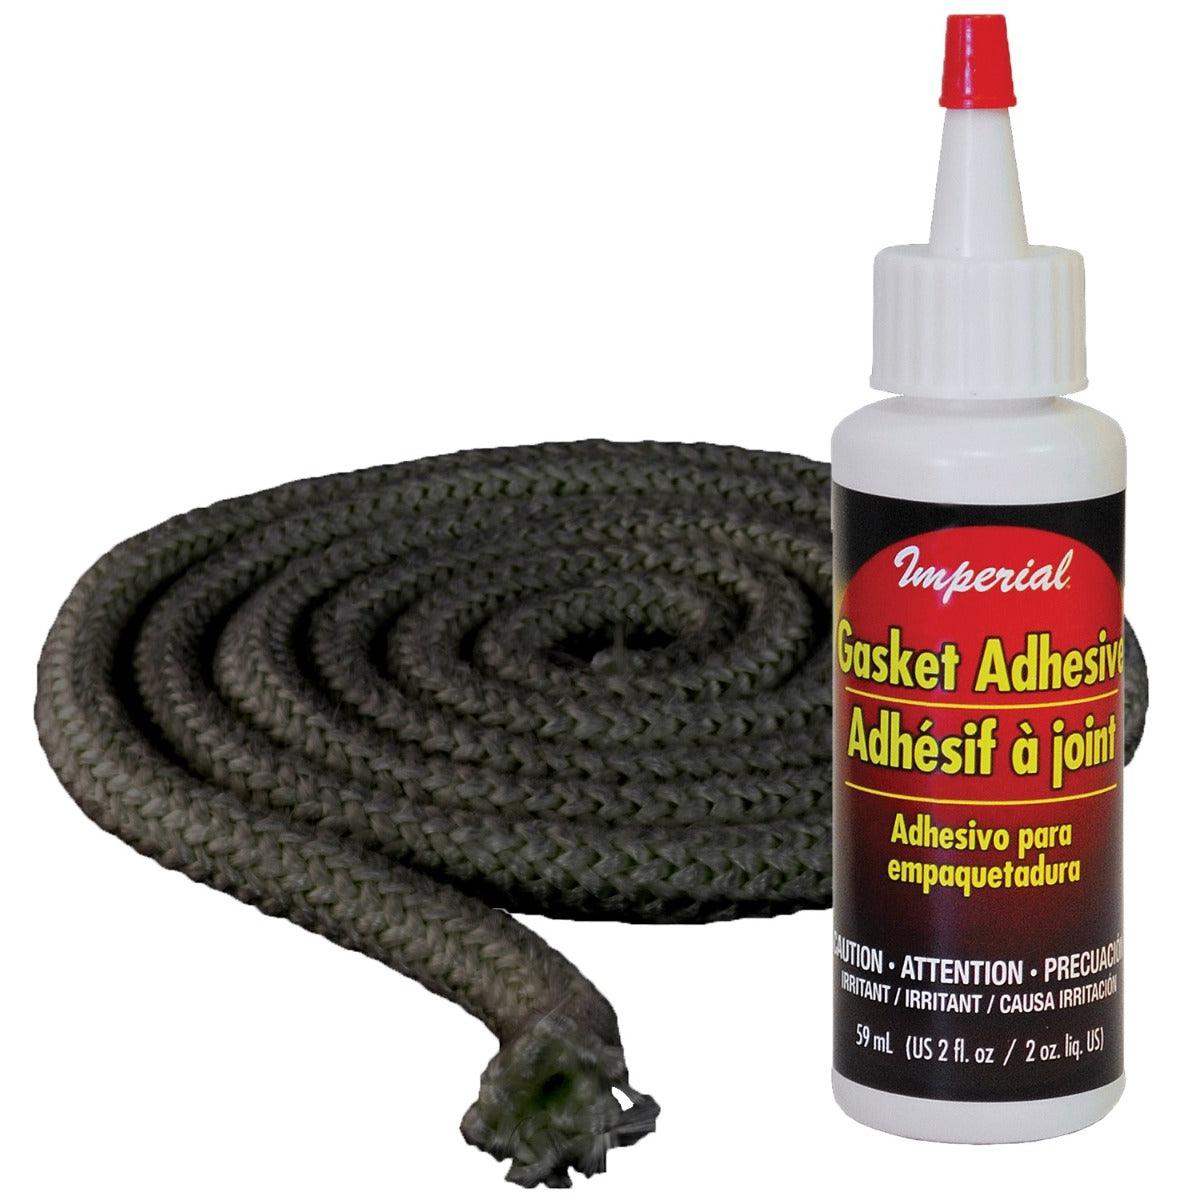 Whitfield Door Rope Gasket Kit 1/2in x 7ft - Woodstove Fireplace Glass